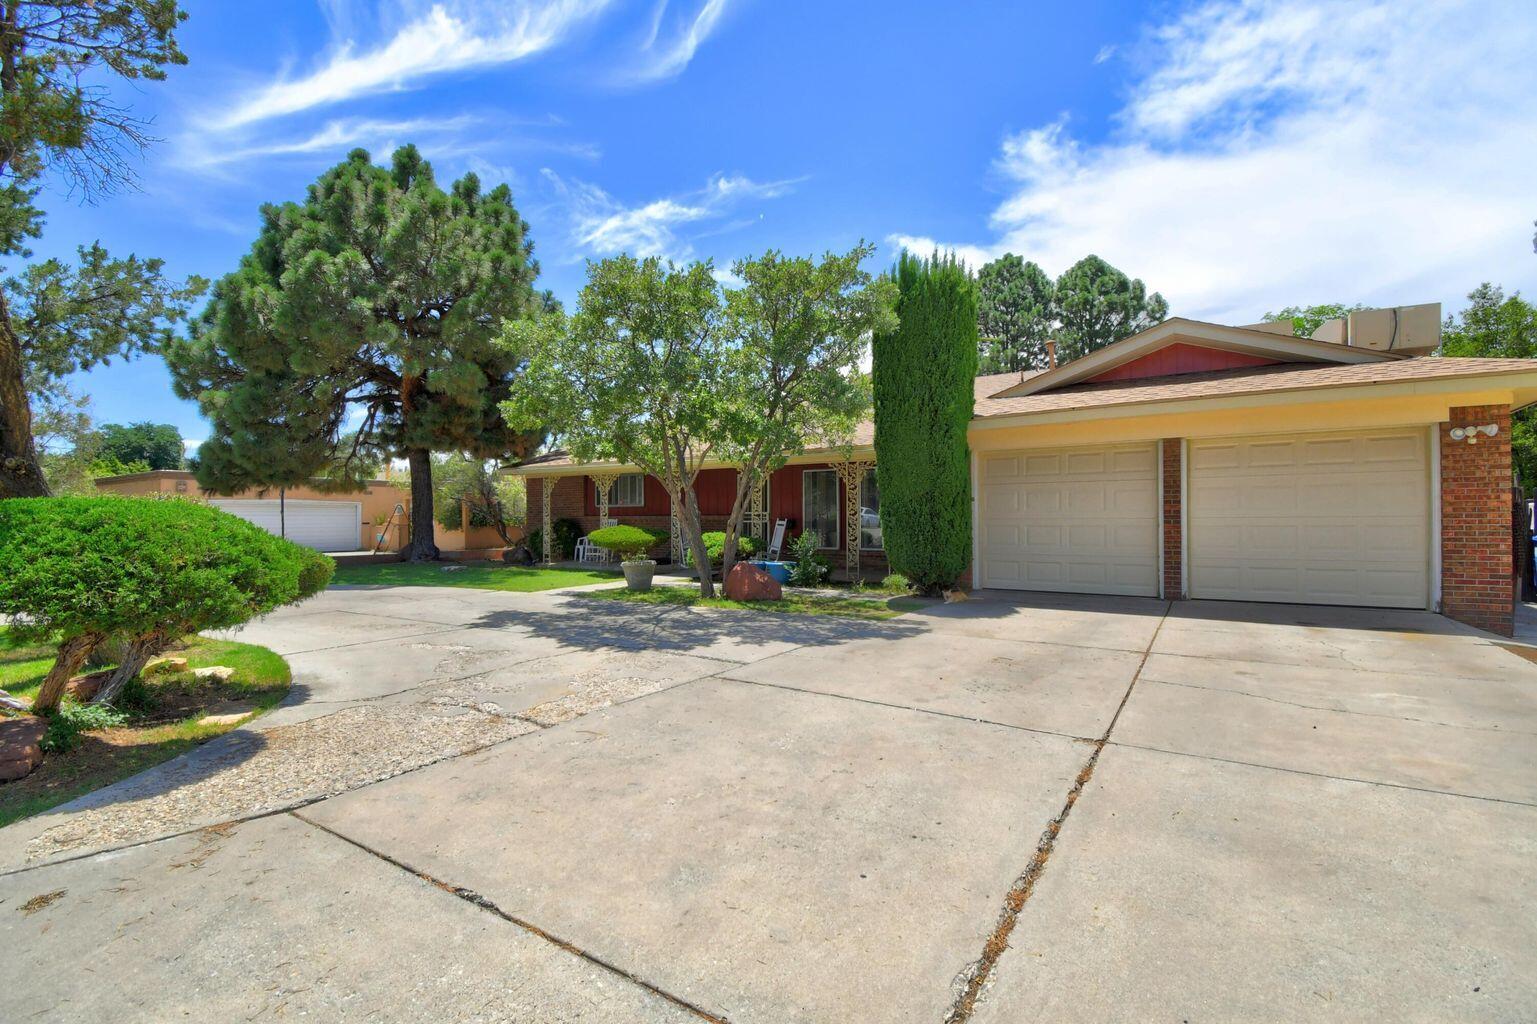 Don't miss this great opportunity to see this large family home in convenient Uptown neighborhood.  Walking distance to Sandia High School, swimming pool and parks.  So many possibilities with the diverse floor plan.  Large kitchen with island and breakfast area.  All bedrooms are large with oversized closets.  Front yard includes circular driveway, inviting porch and mature trees.